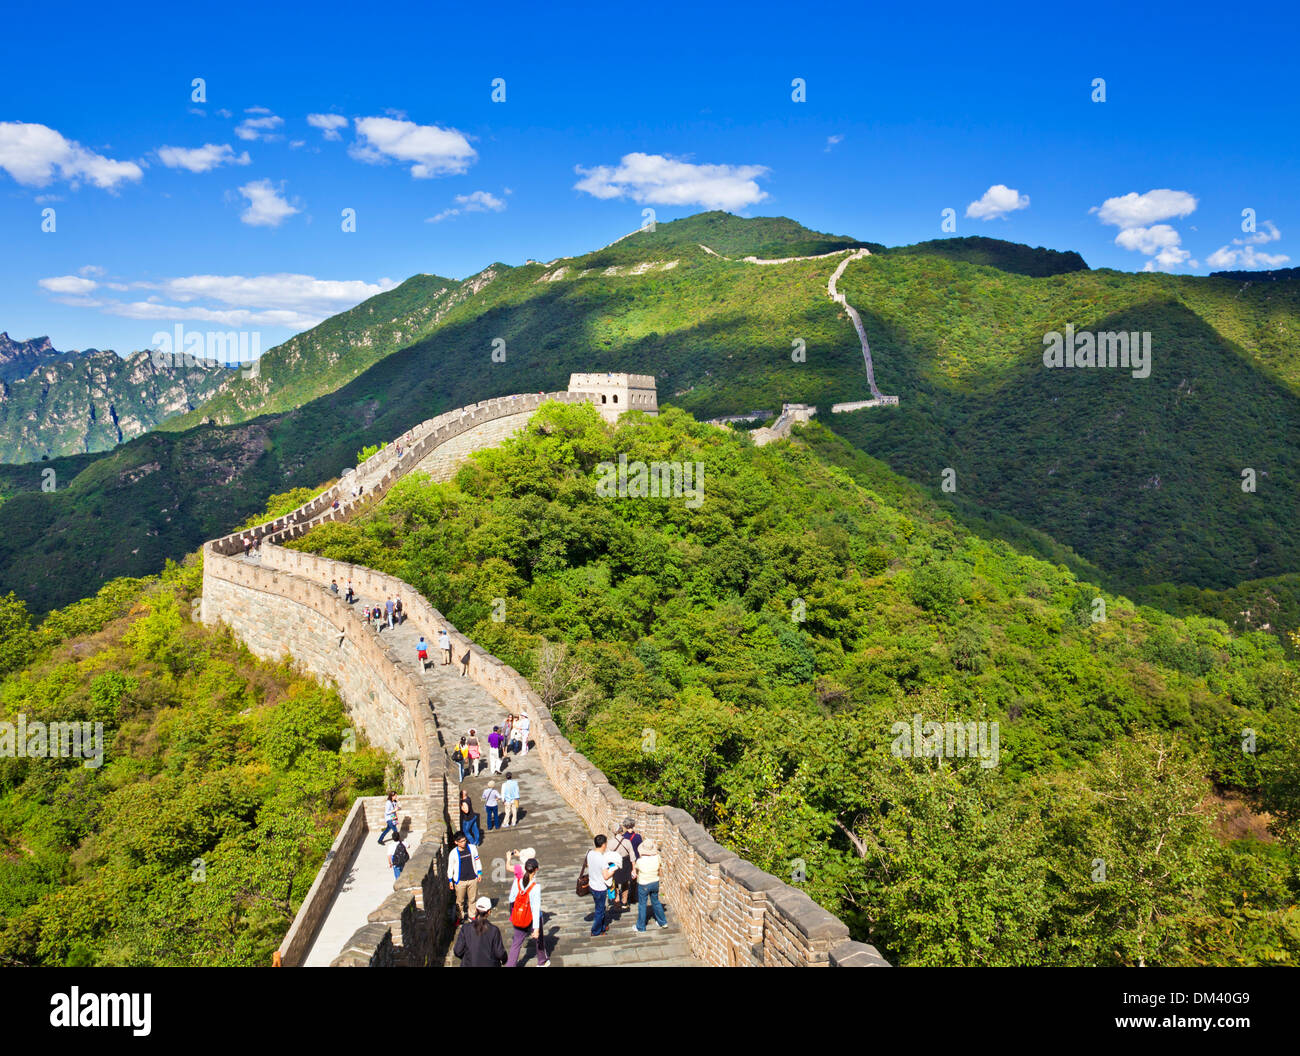 Tourists visiting the Great Wall of China, UNESCO World Heritage Site, Mutianyu, Beijing District, China, Asia Stock Photo